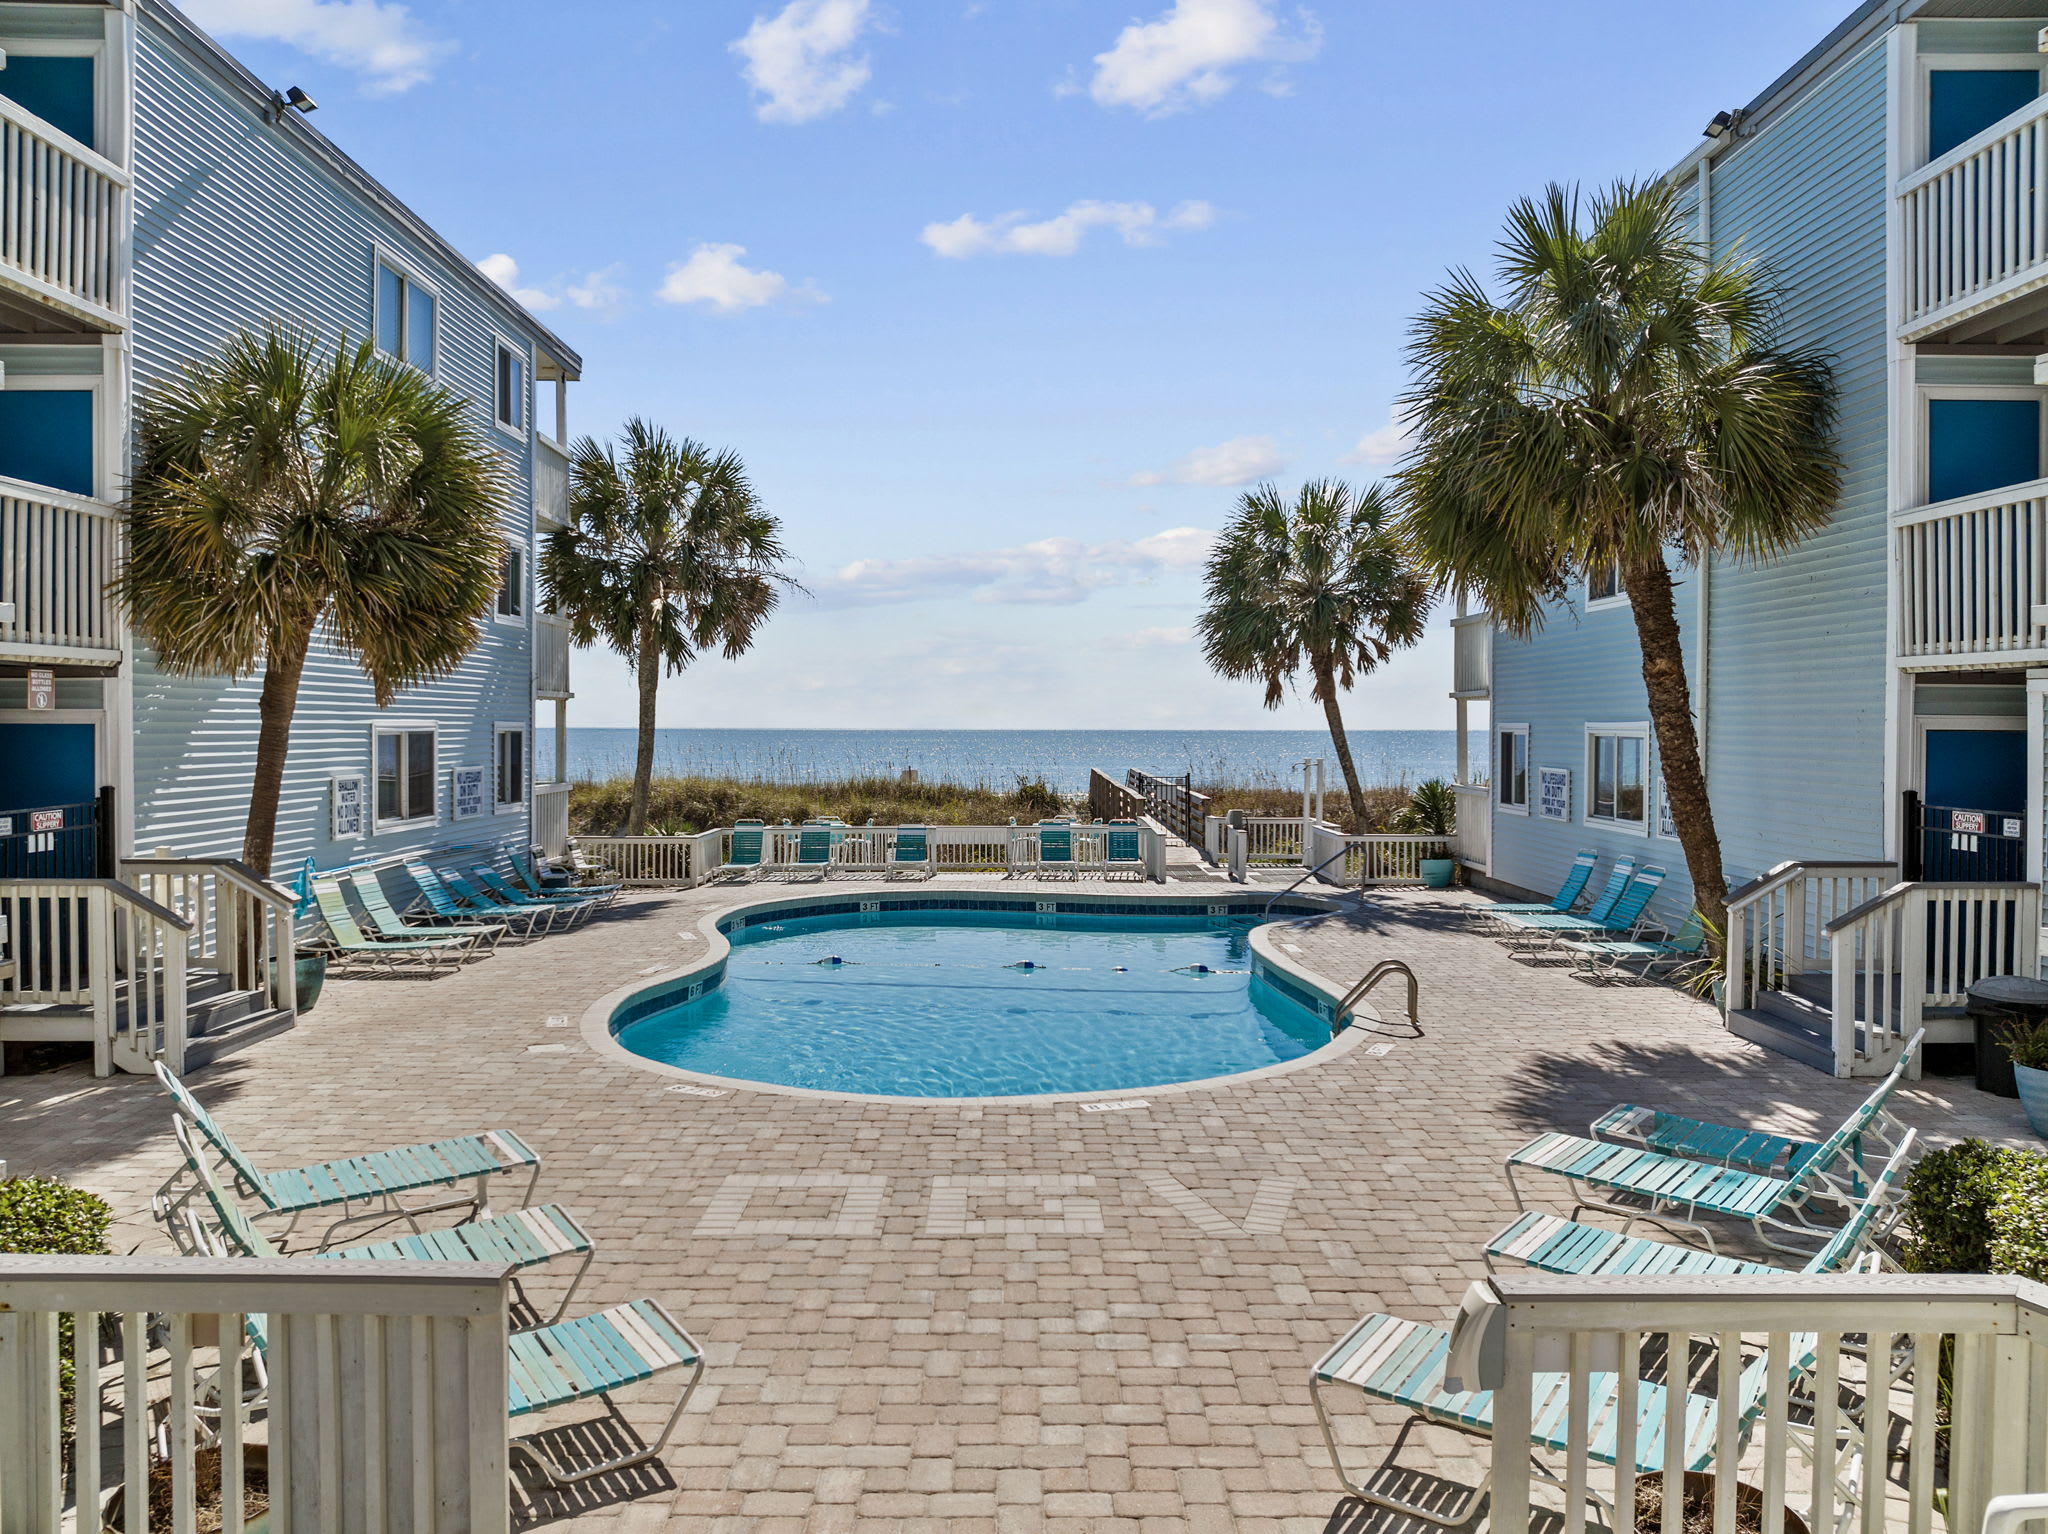 Our condo is just steps away from the pool that is right on the ocean!